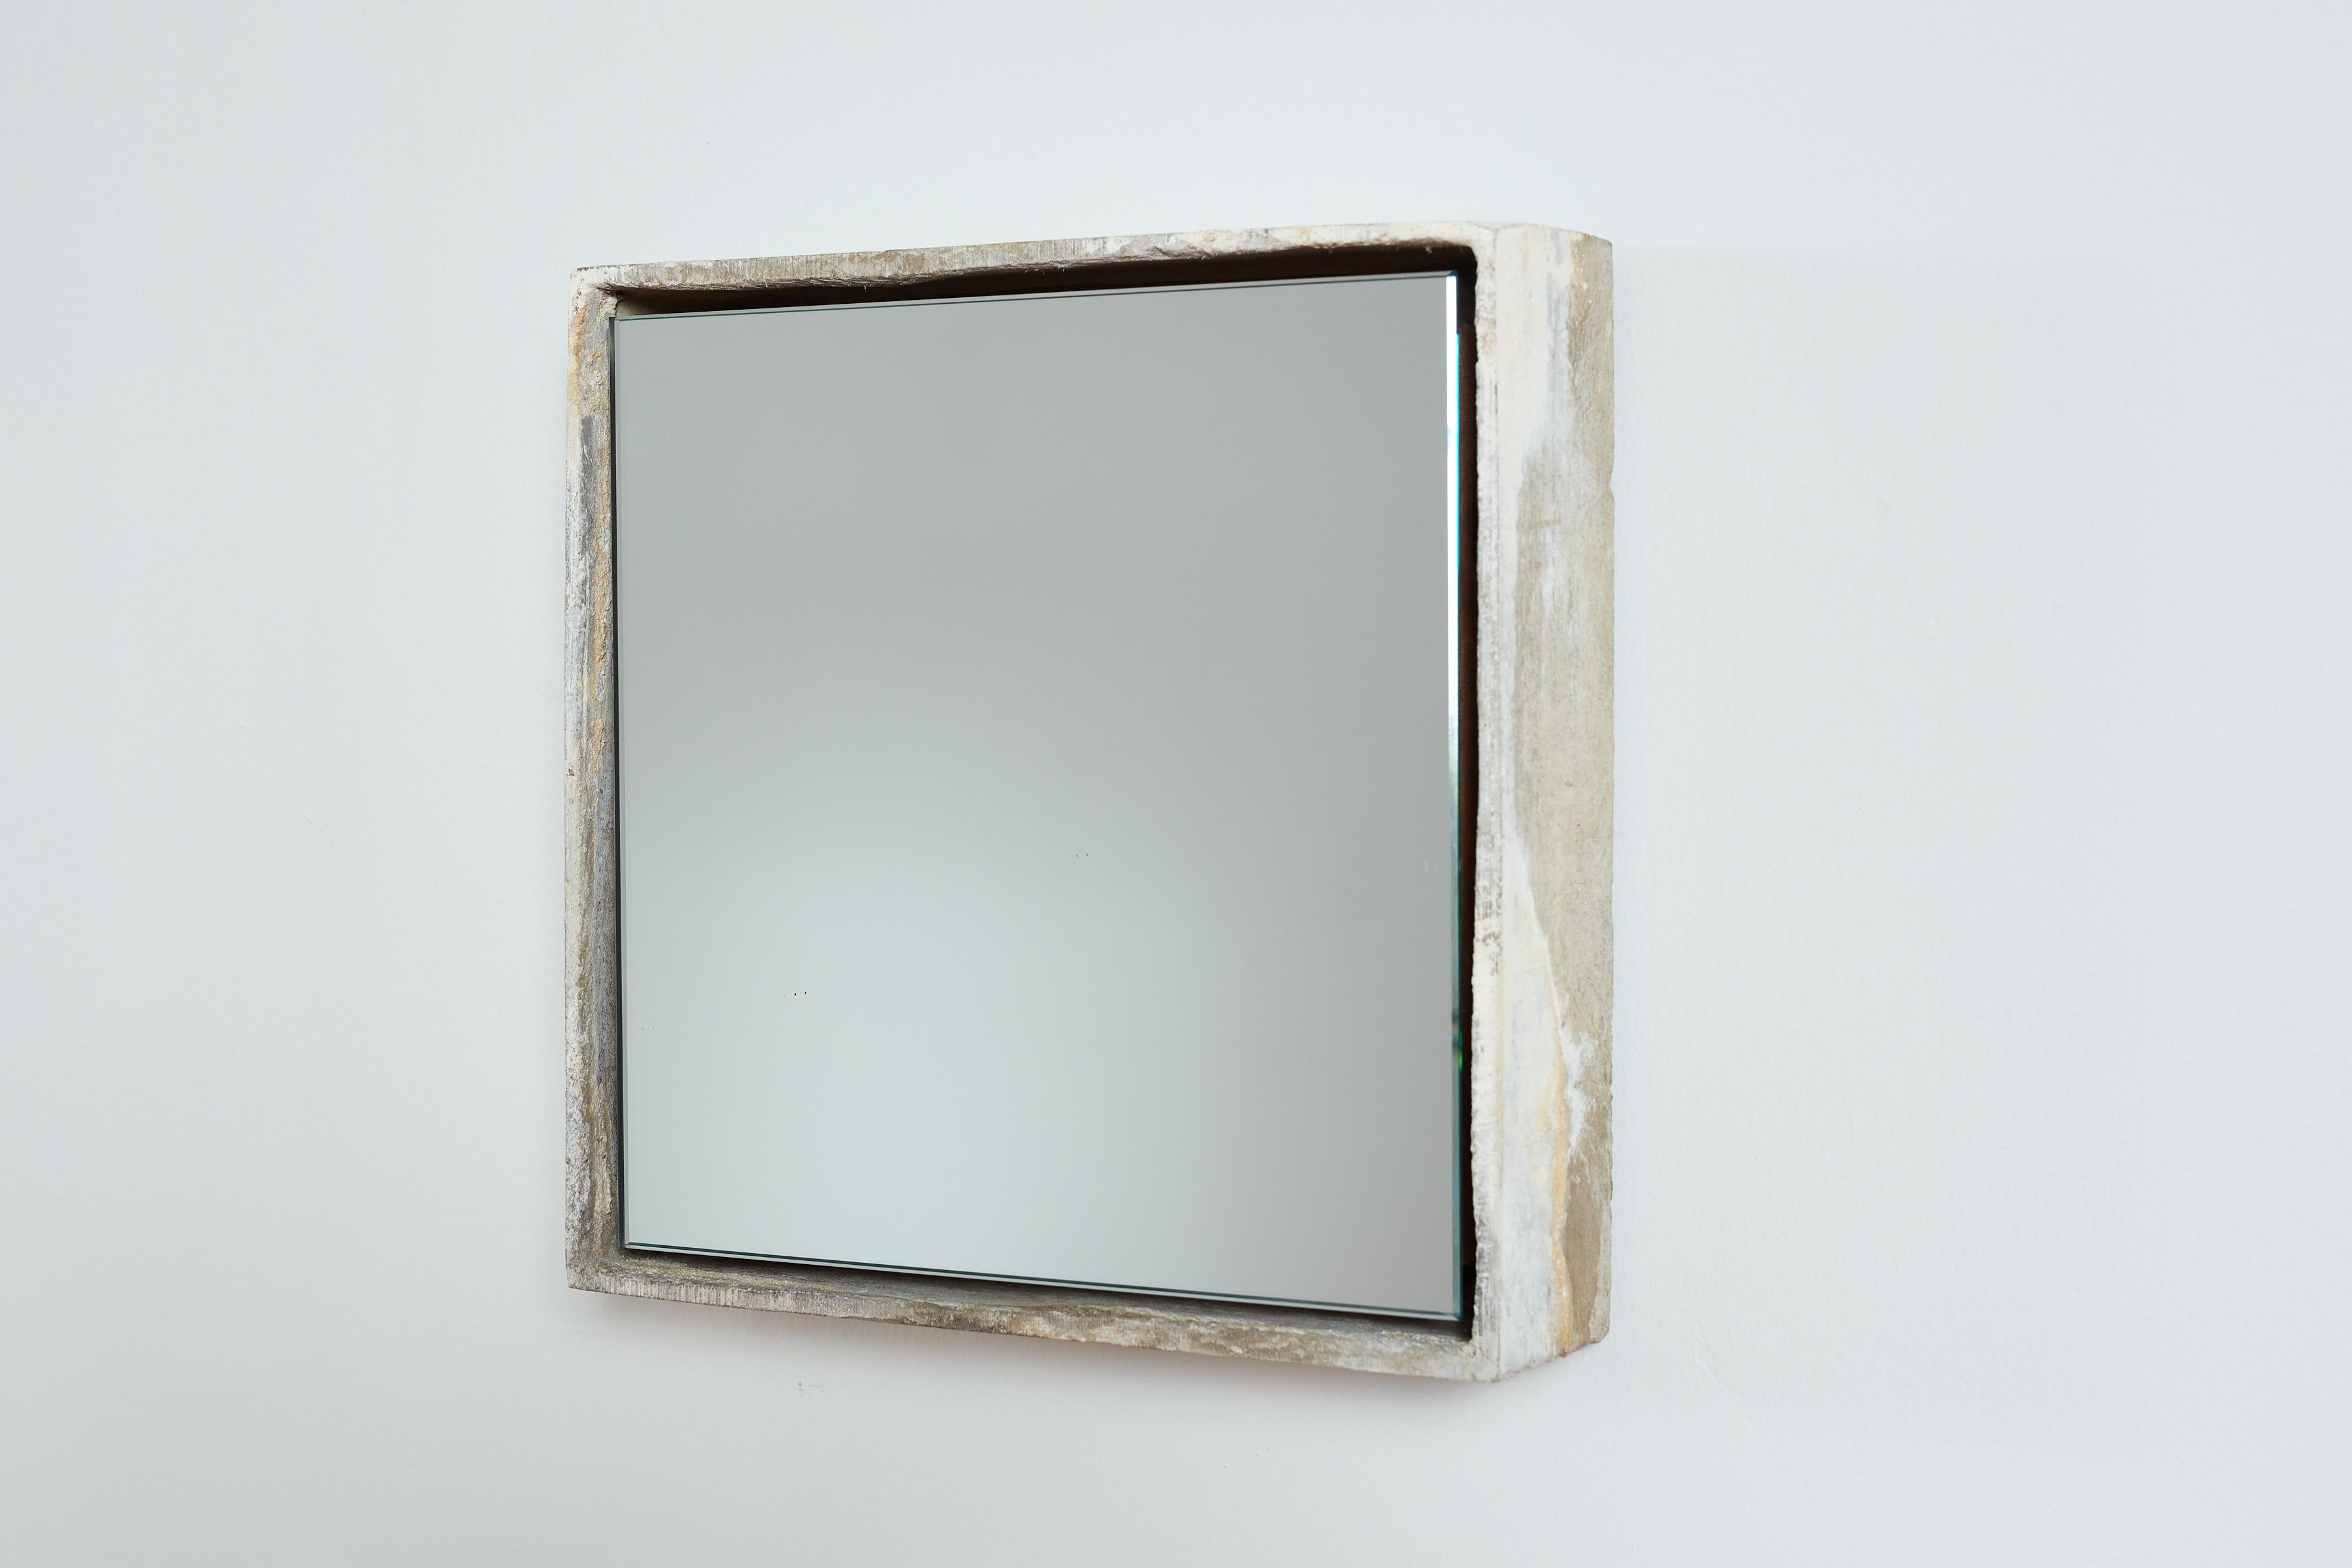 Willy Guhl mirror with fantastic patina'd thick signature cement frame and new mirror
2 sizes available / multiple quantities.